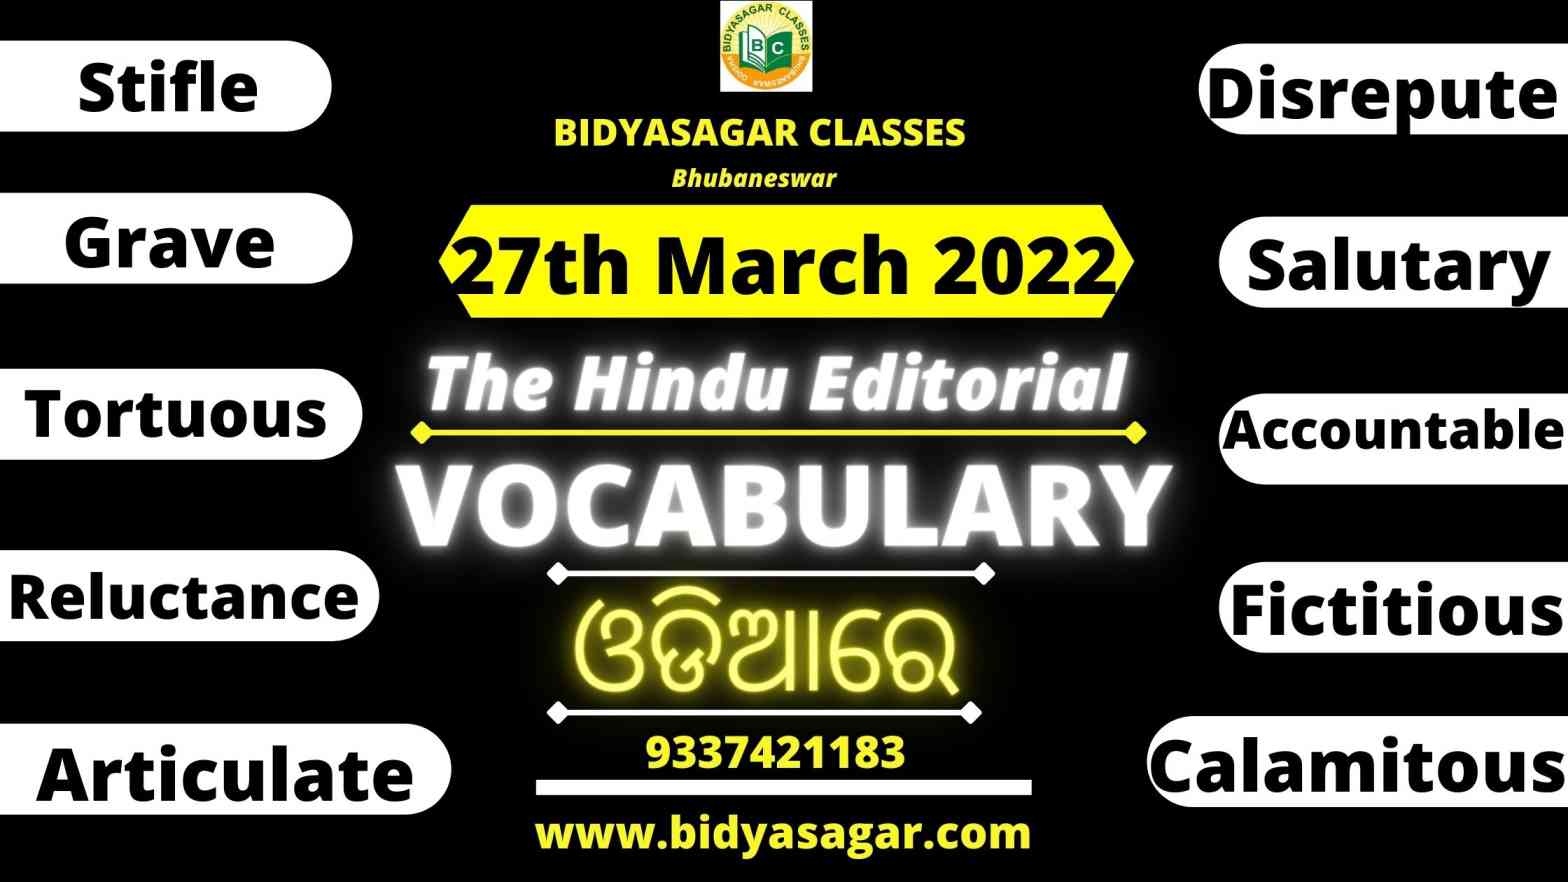 The Hindu Editorial Vocabulary of 27th March 2022